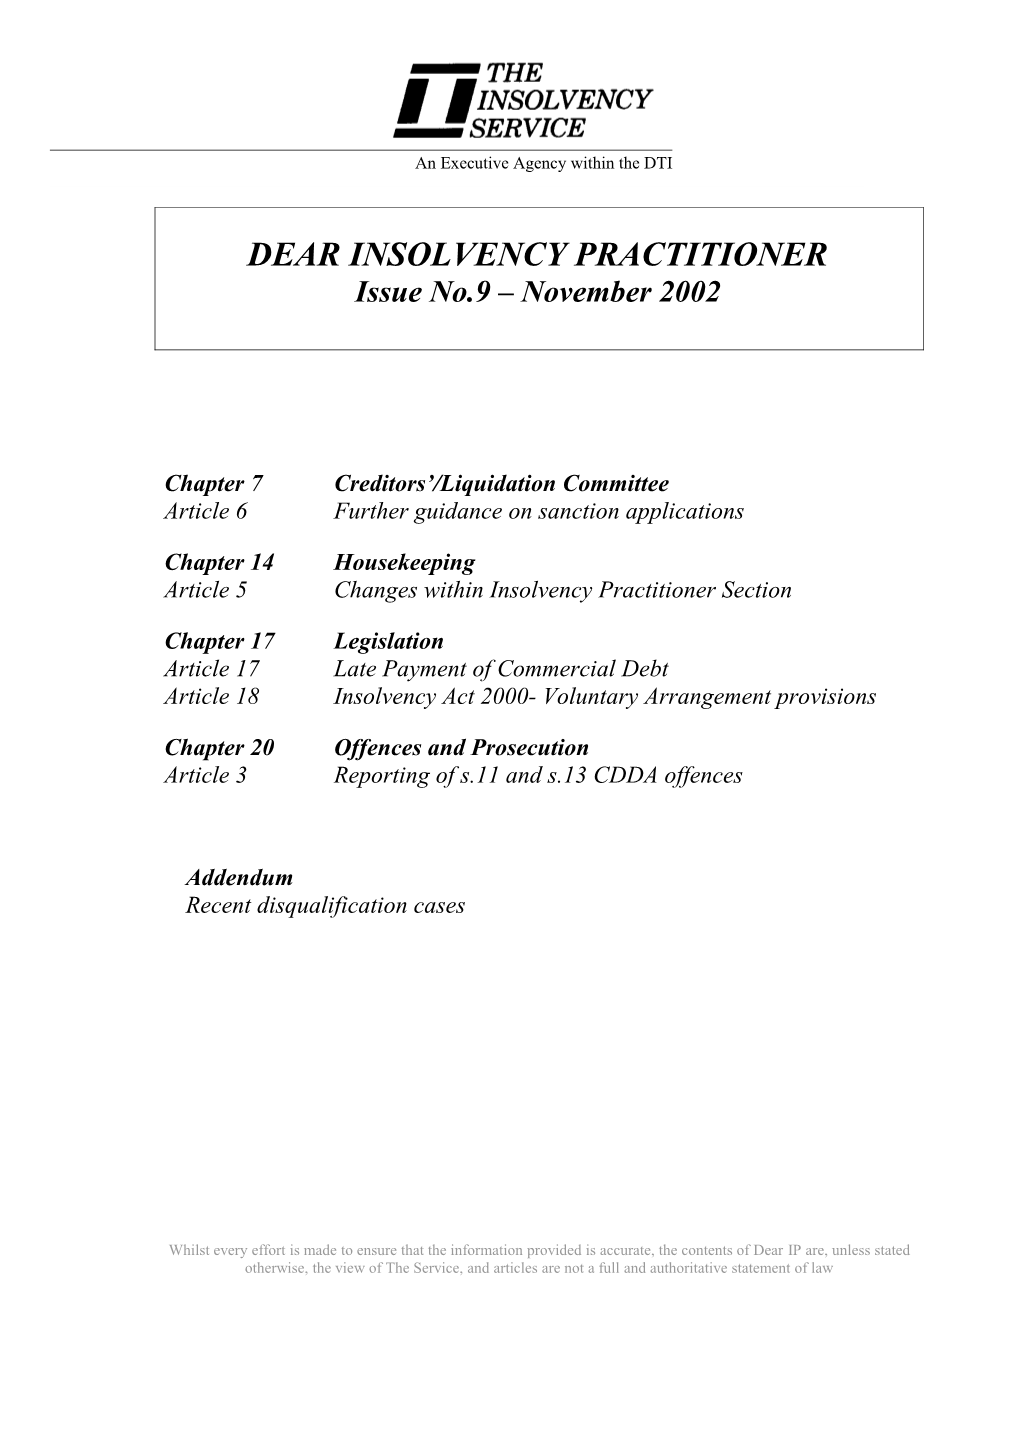 Insolvency Practitioner Section